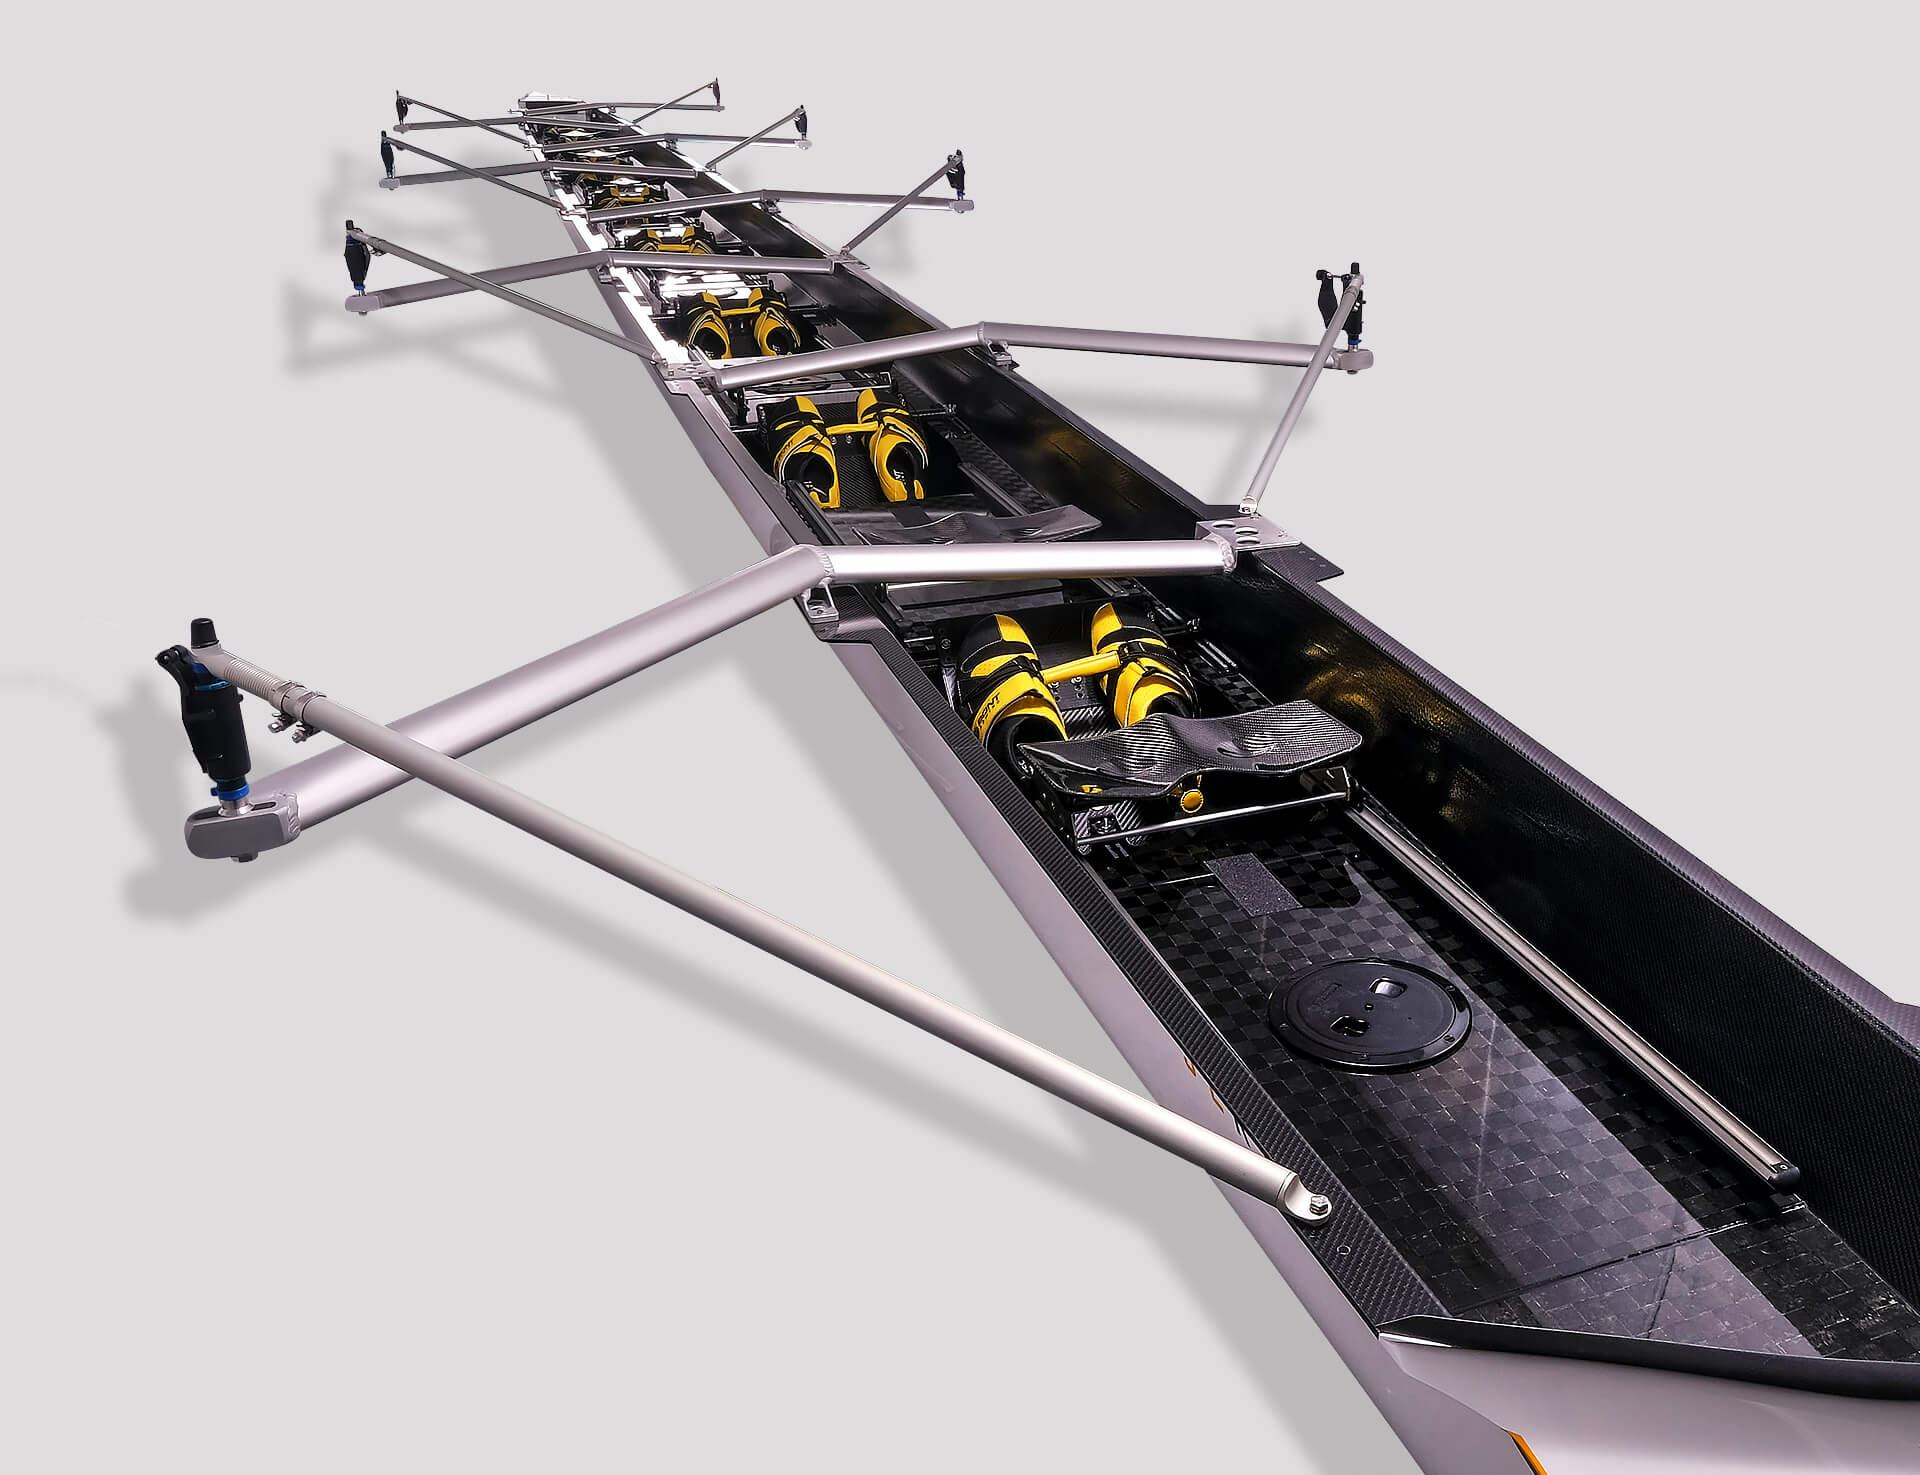 product shot of the SL Racing eights-rowing-boat-skiff-models with aluminium rigging and yellow and black shoes inside. aluminium rigging and yellow and black shoes inside.